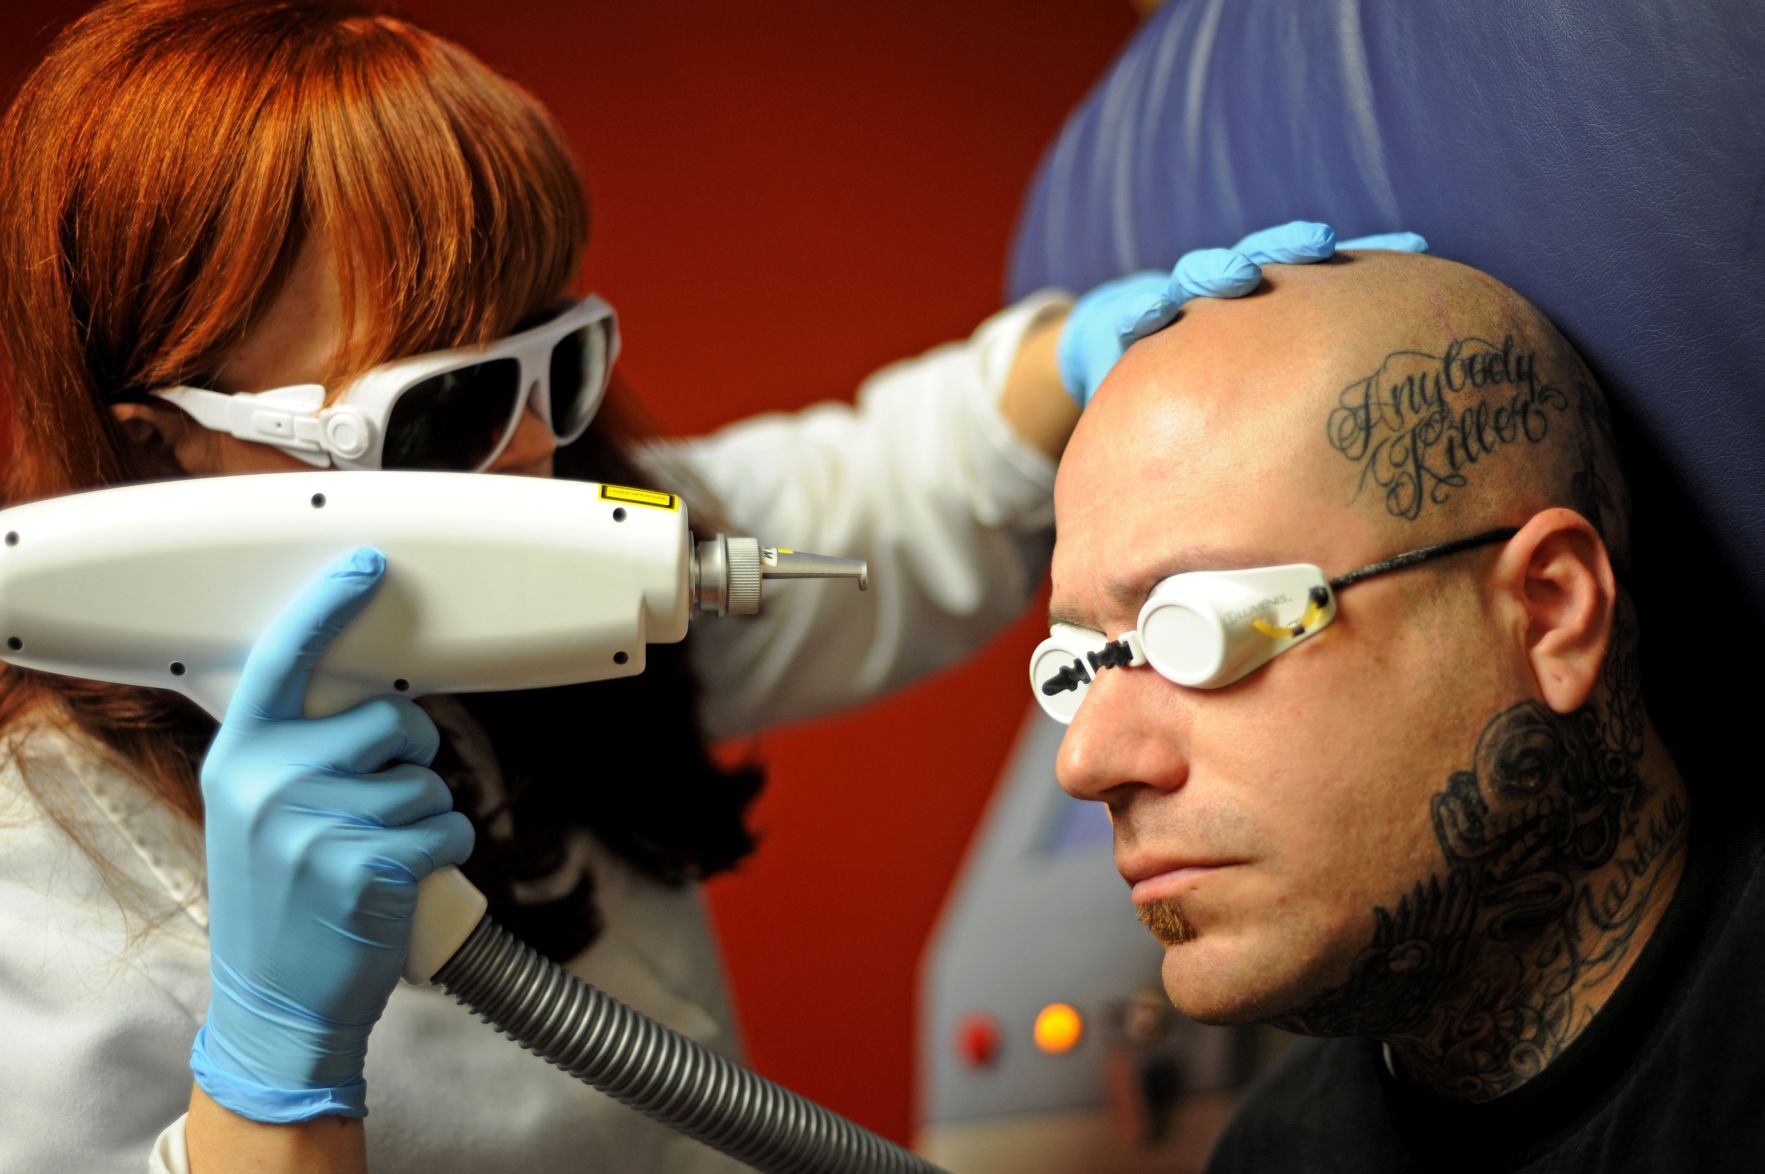 Tattoo Removals Auckland  Home